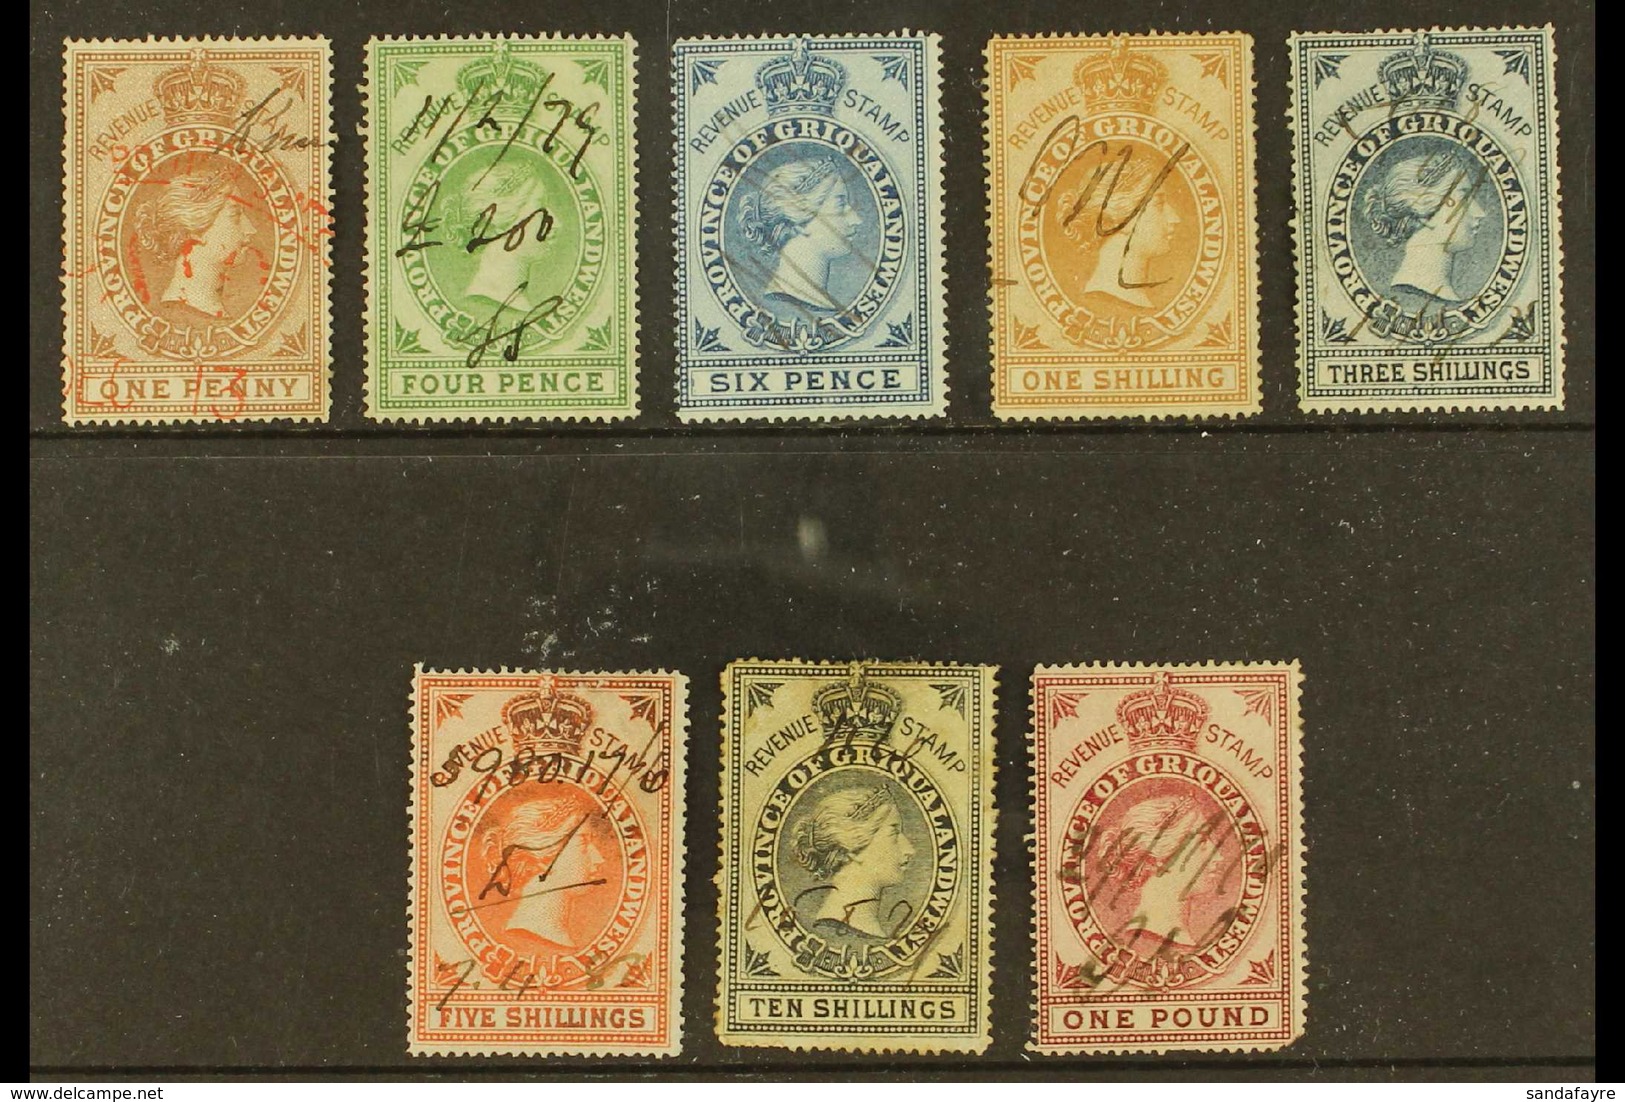 GRIQUALAND REVENUES 1879 1d Brown, 4d Green, 6d Blue, 1s Brown, 3s Blue, 5s Orange, 10s Black And £1 Red, Barefoot 60/62 - Unclassified